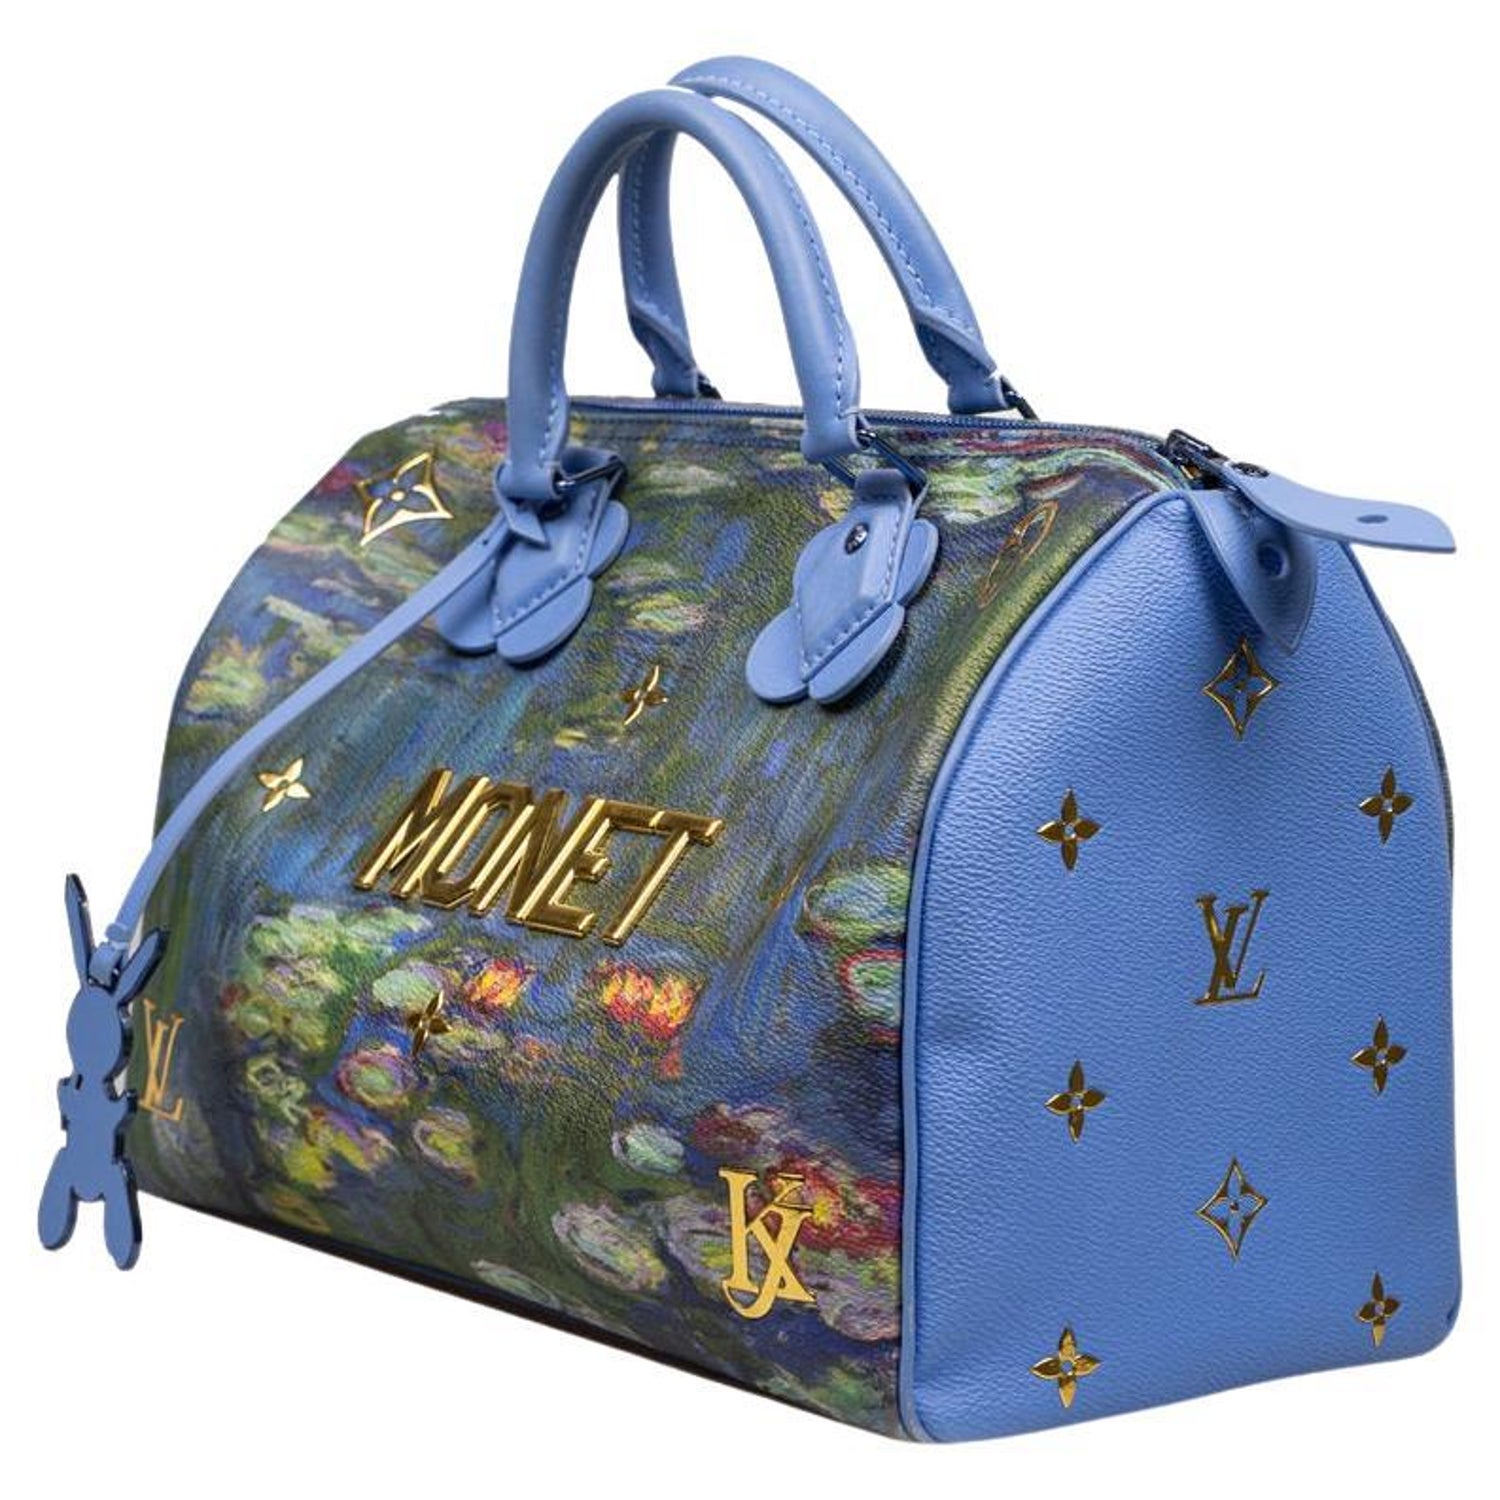 Louis Vuitton - Limited Edition Speedy 30 by Jeff Koons - - Catawiki